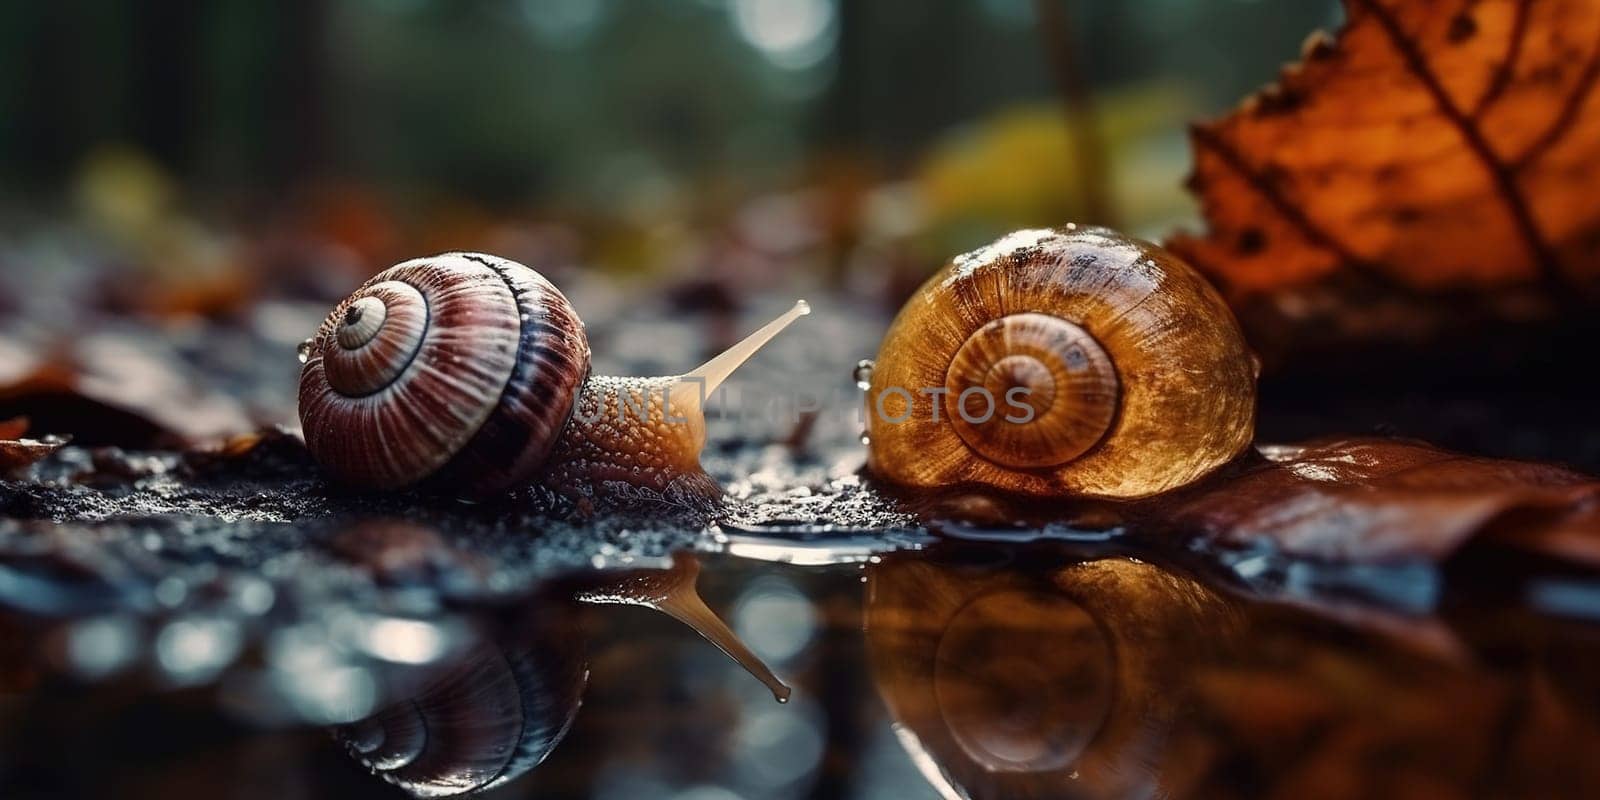 Snails Drinks Water From The Puddle In The Autumn Fortst by tan4ikk1